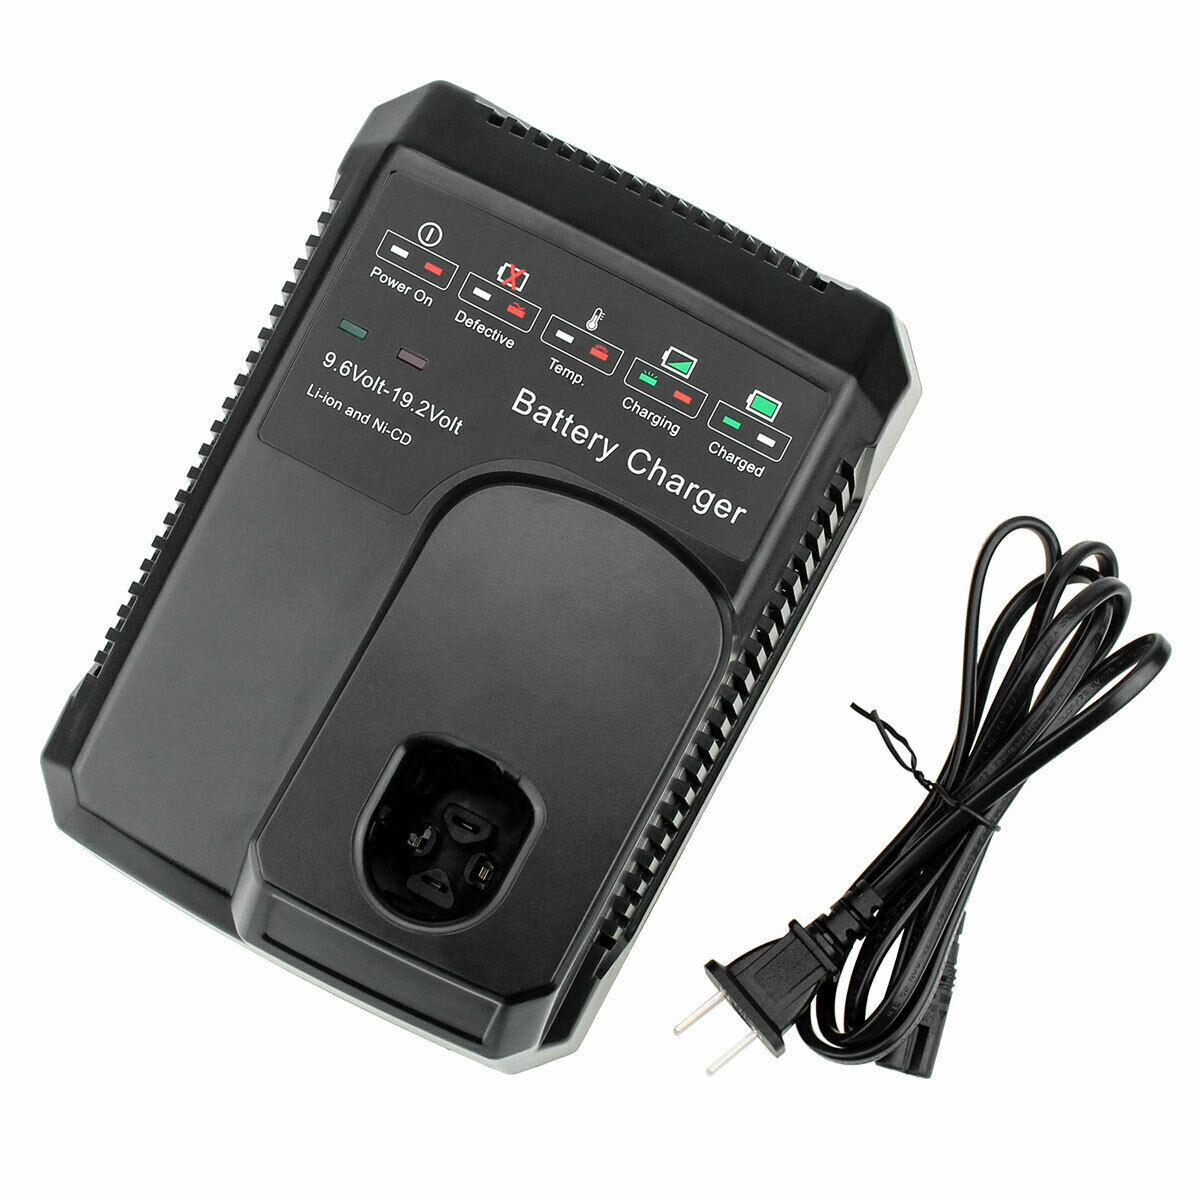 ADVNOVO C3 19.2V Battery Charger 1425301 Compatible With Craftsman 19.2 Volt Lithium NiCD NiMH C3  XCP 1425301 1323903 130279005